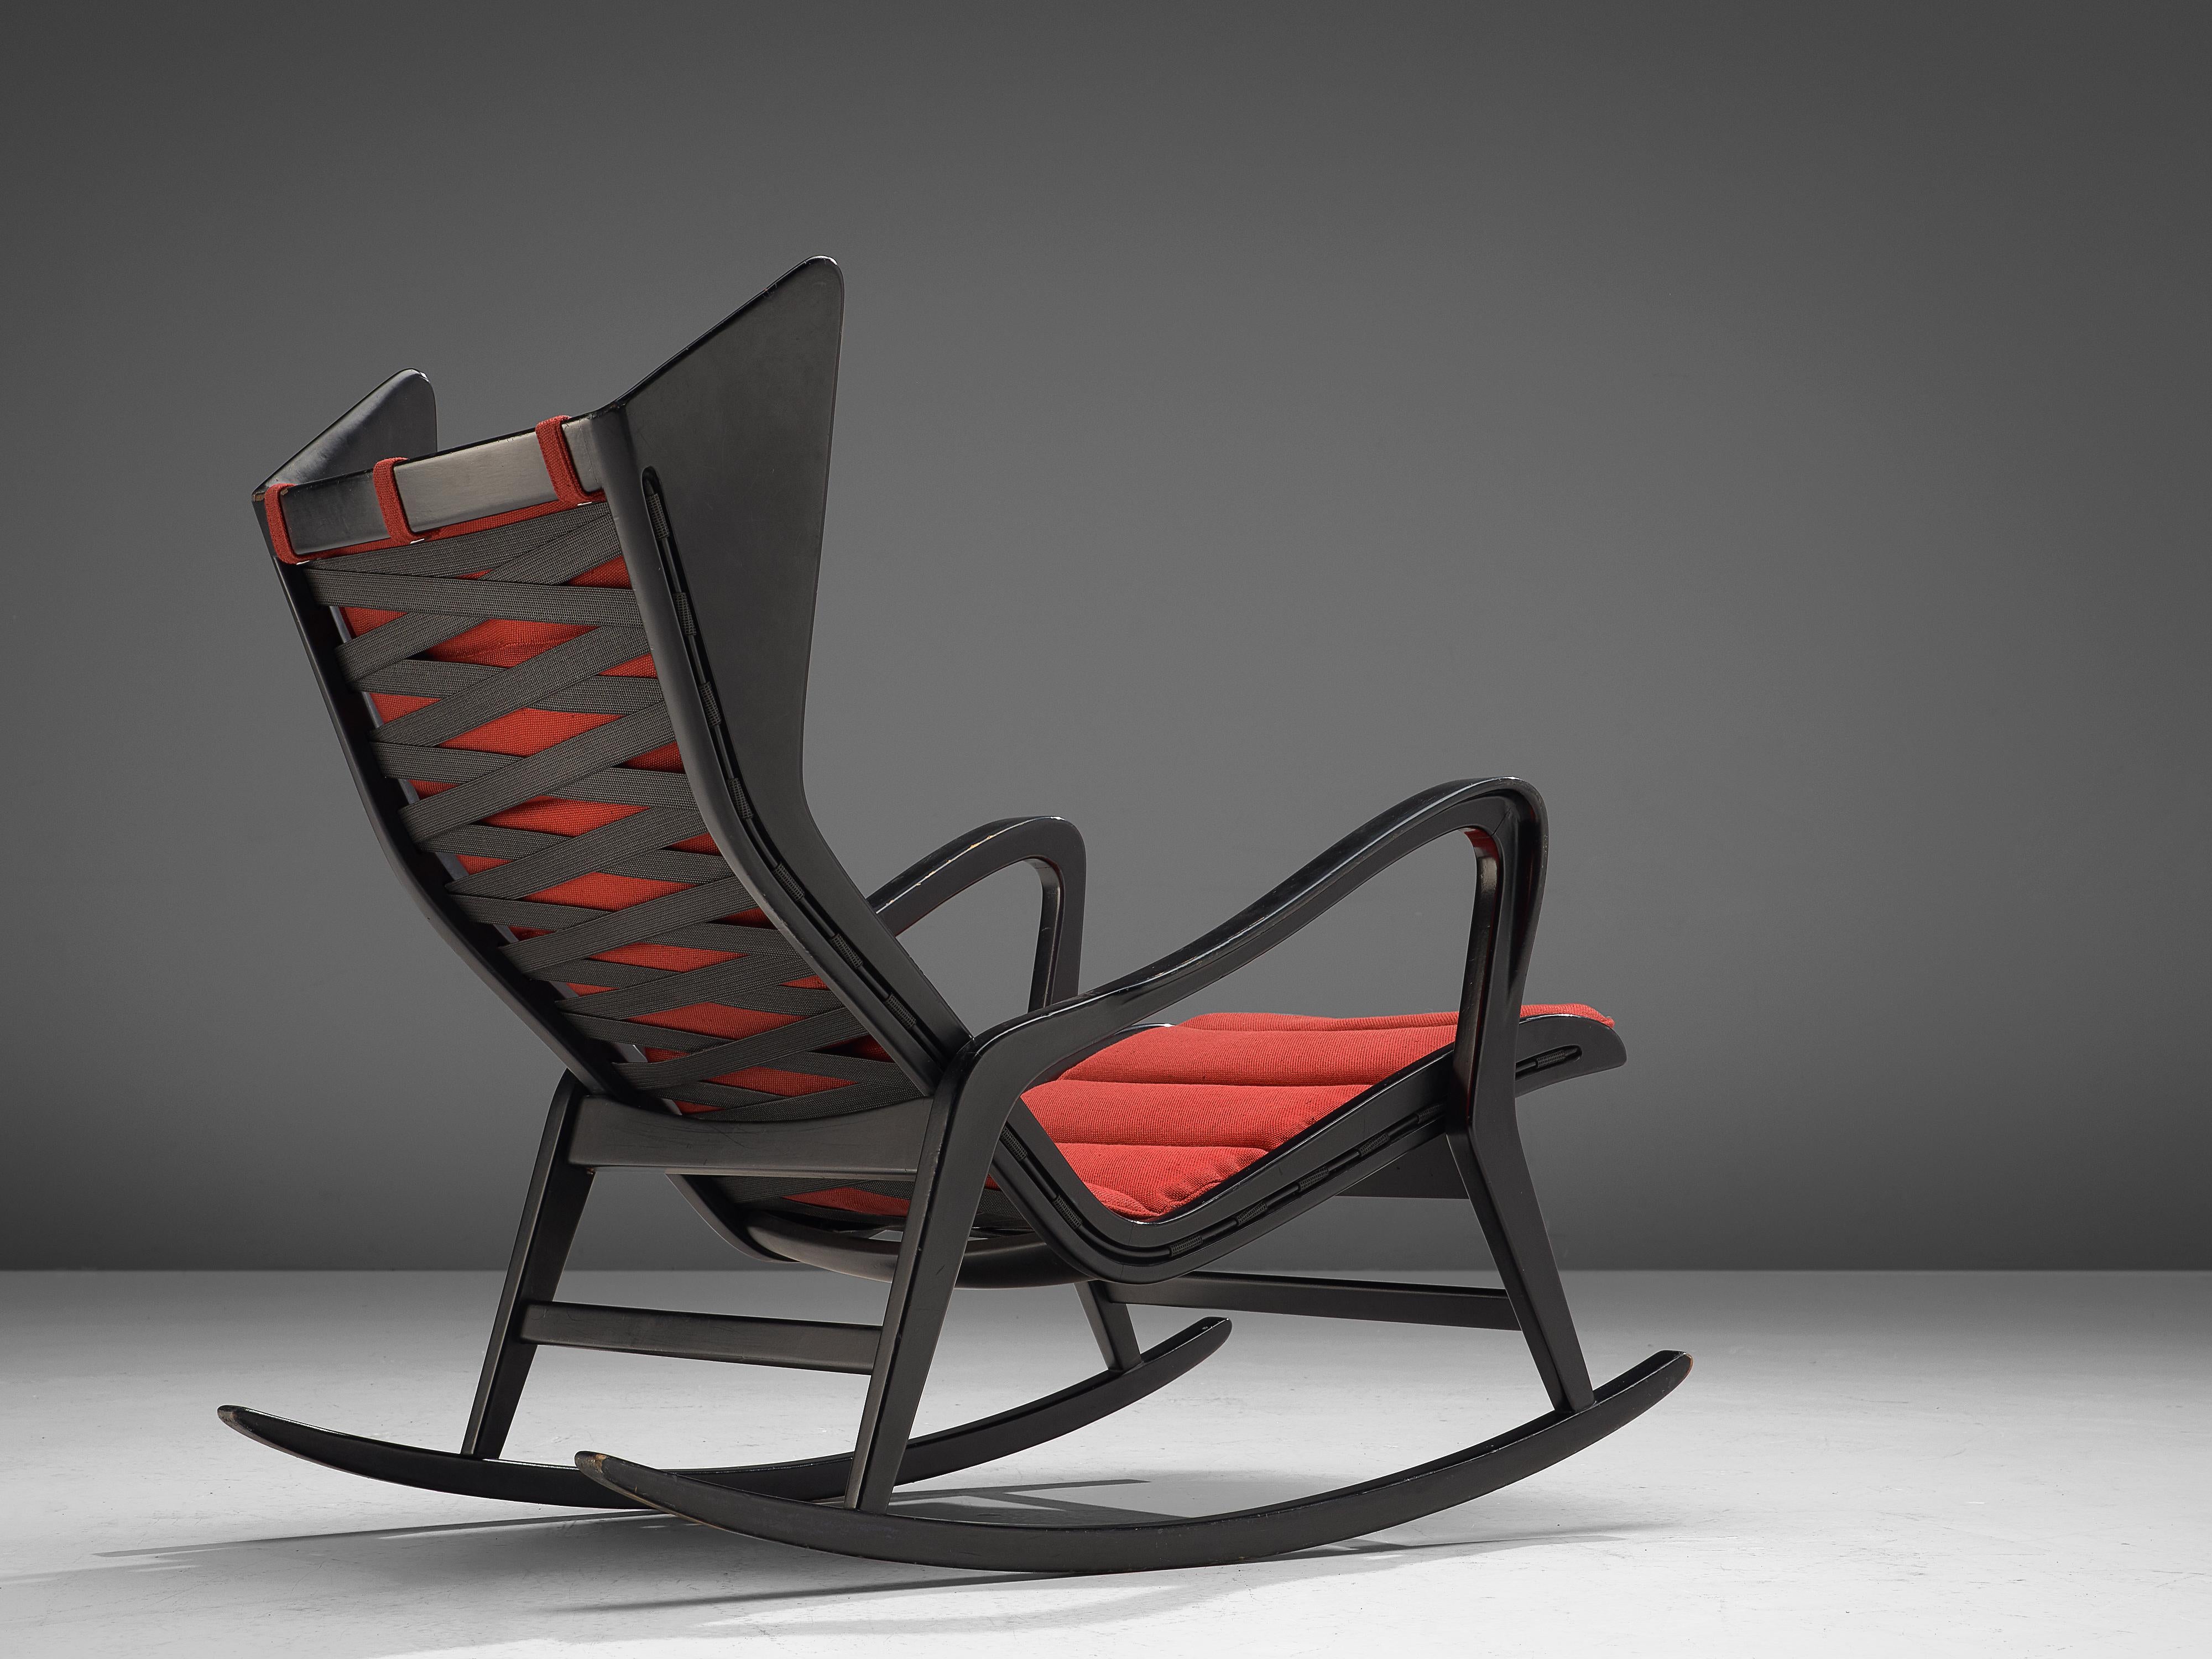 Cassina, lounge chair model 572, darkened wood and red fabric, Italy, 1950s.

This rocking chair in ebonized wood is designed and produced by the Italian company Cassina. This chair is the epitome of high-quality Italian furniture design of the